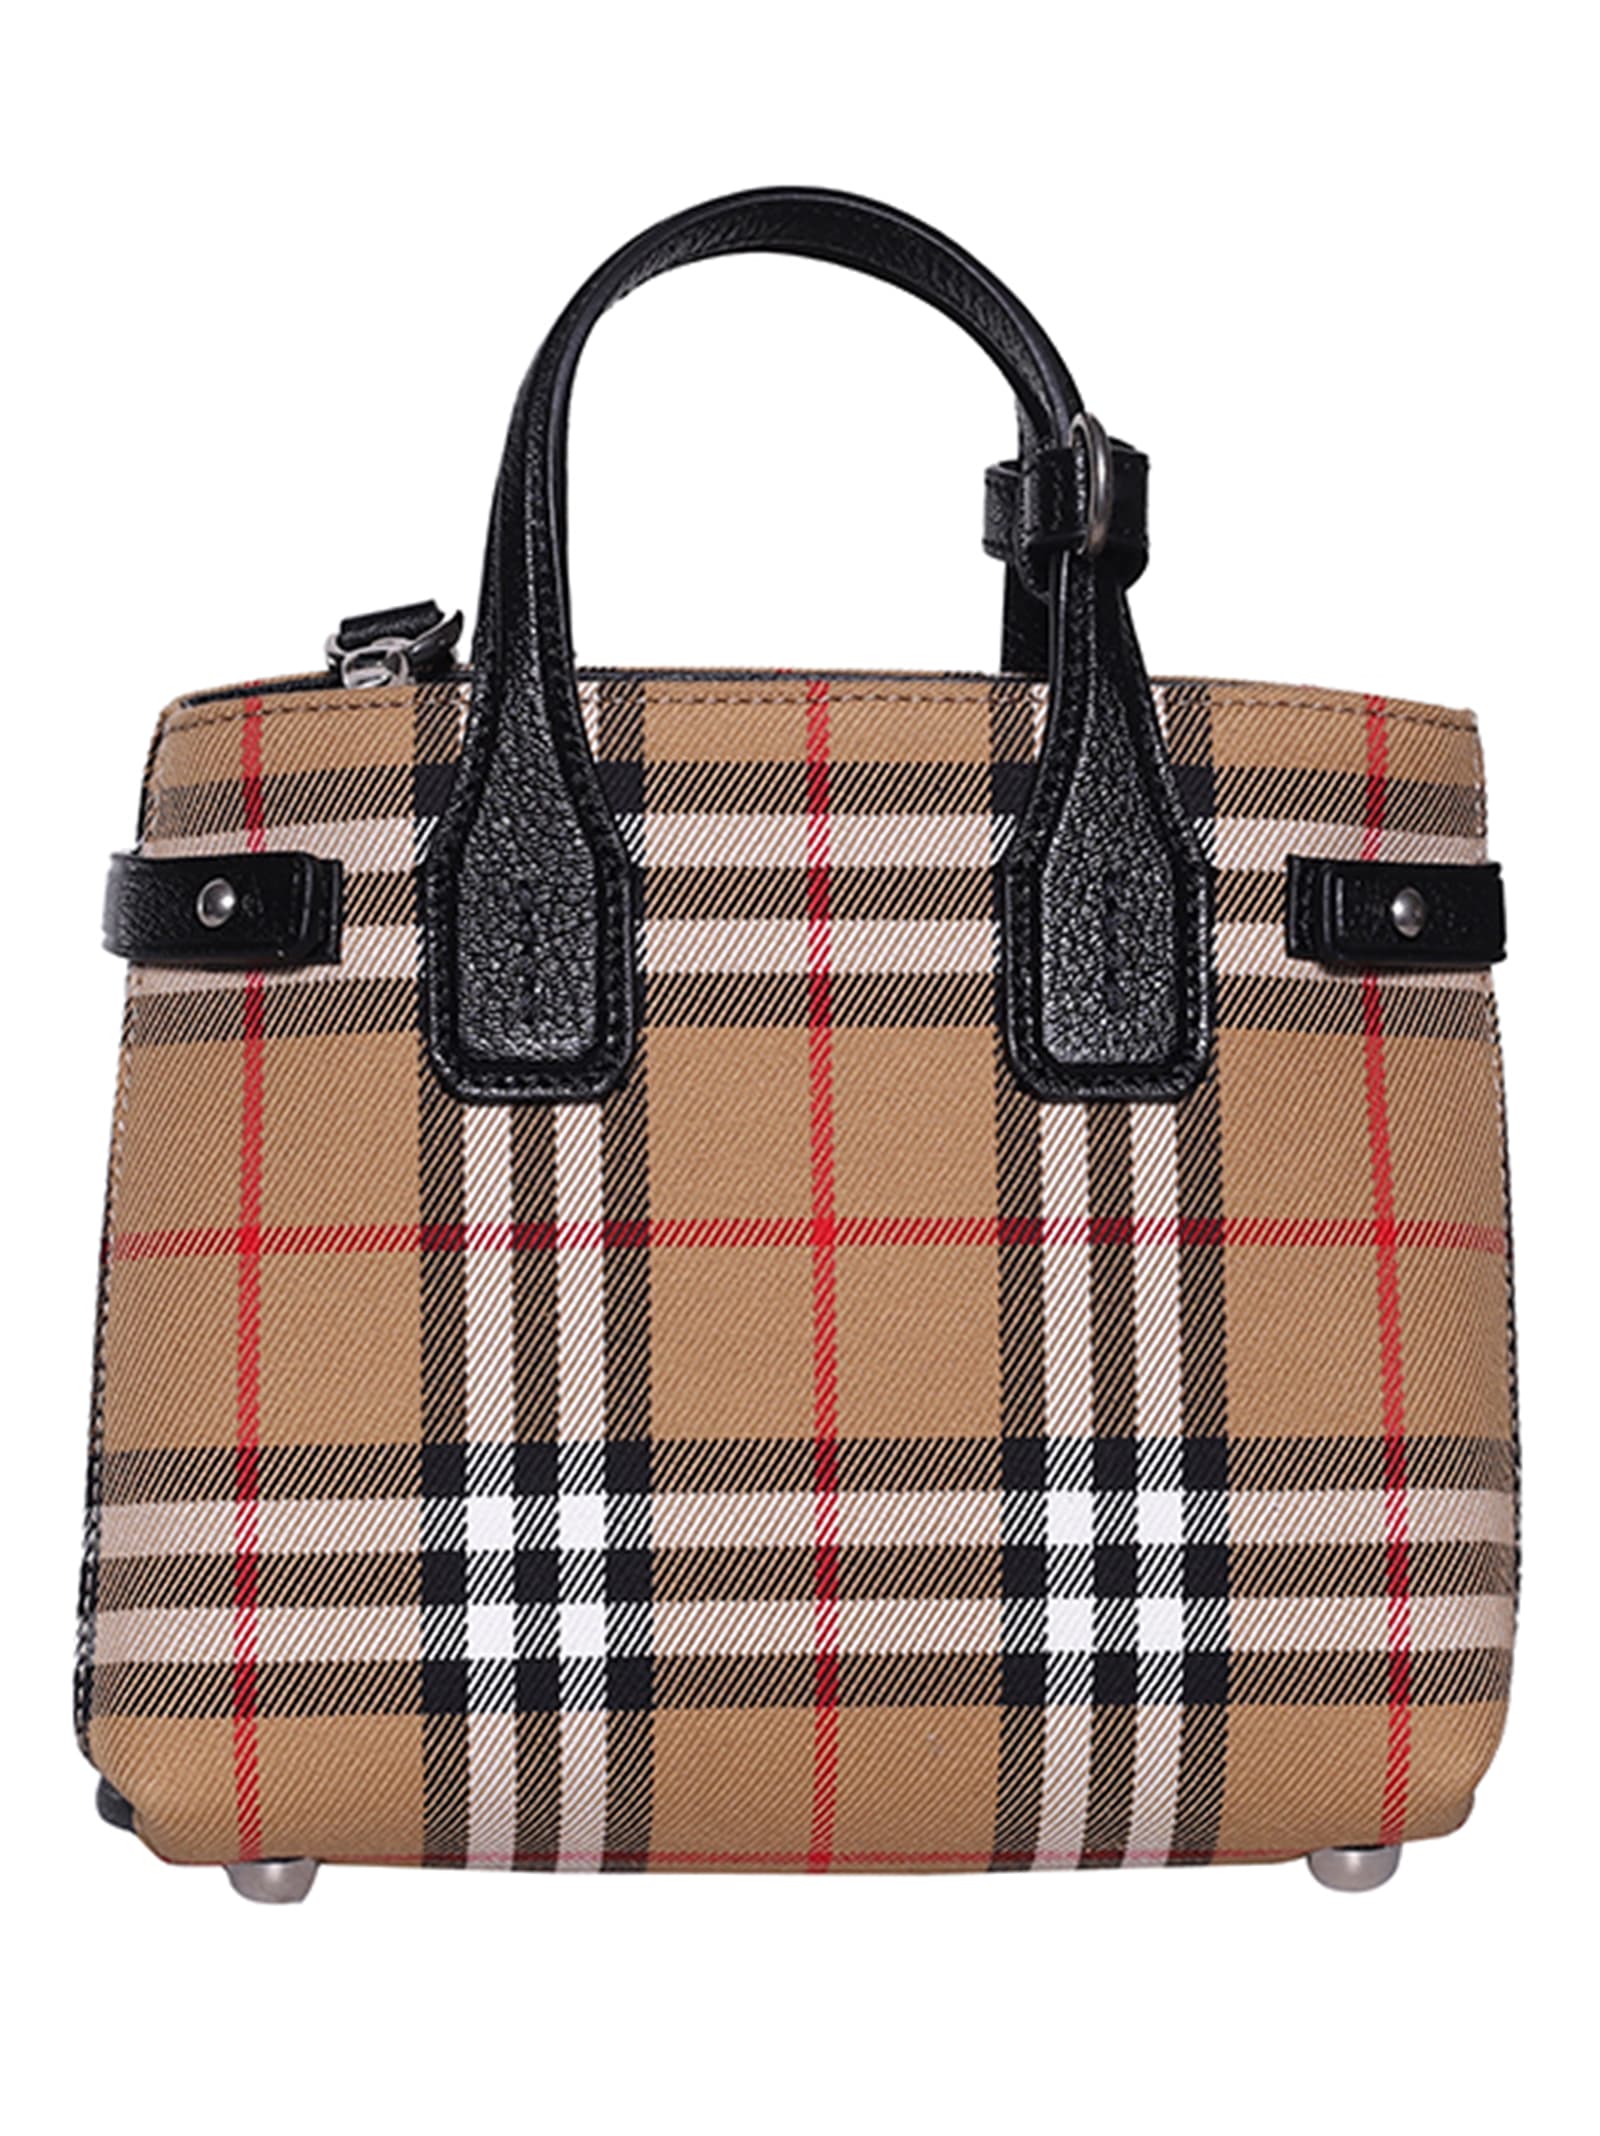 burberry baby banner tote